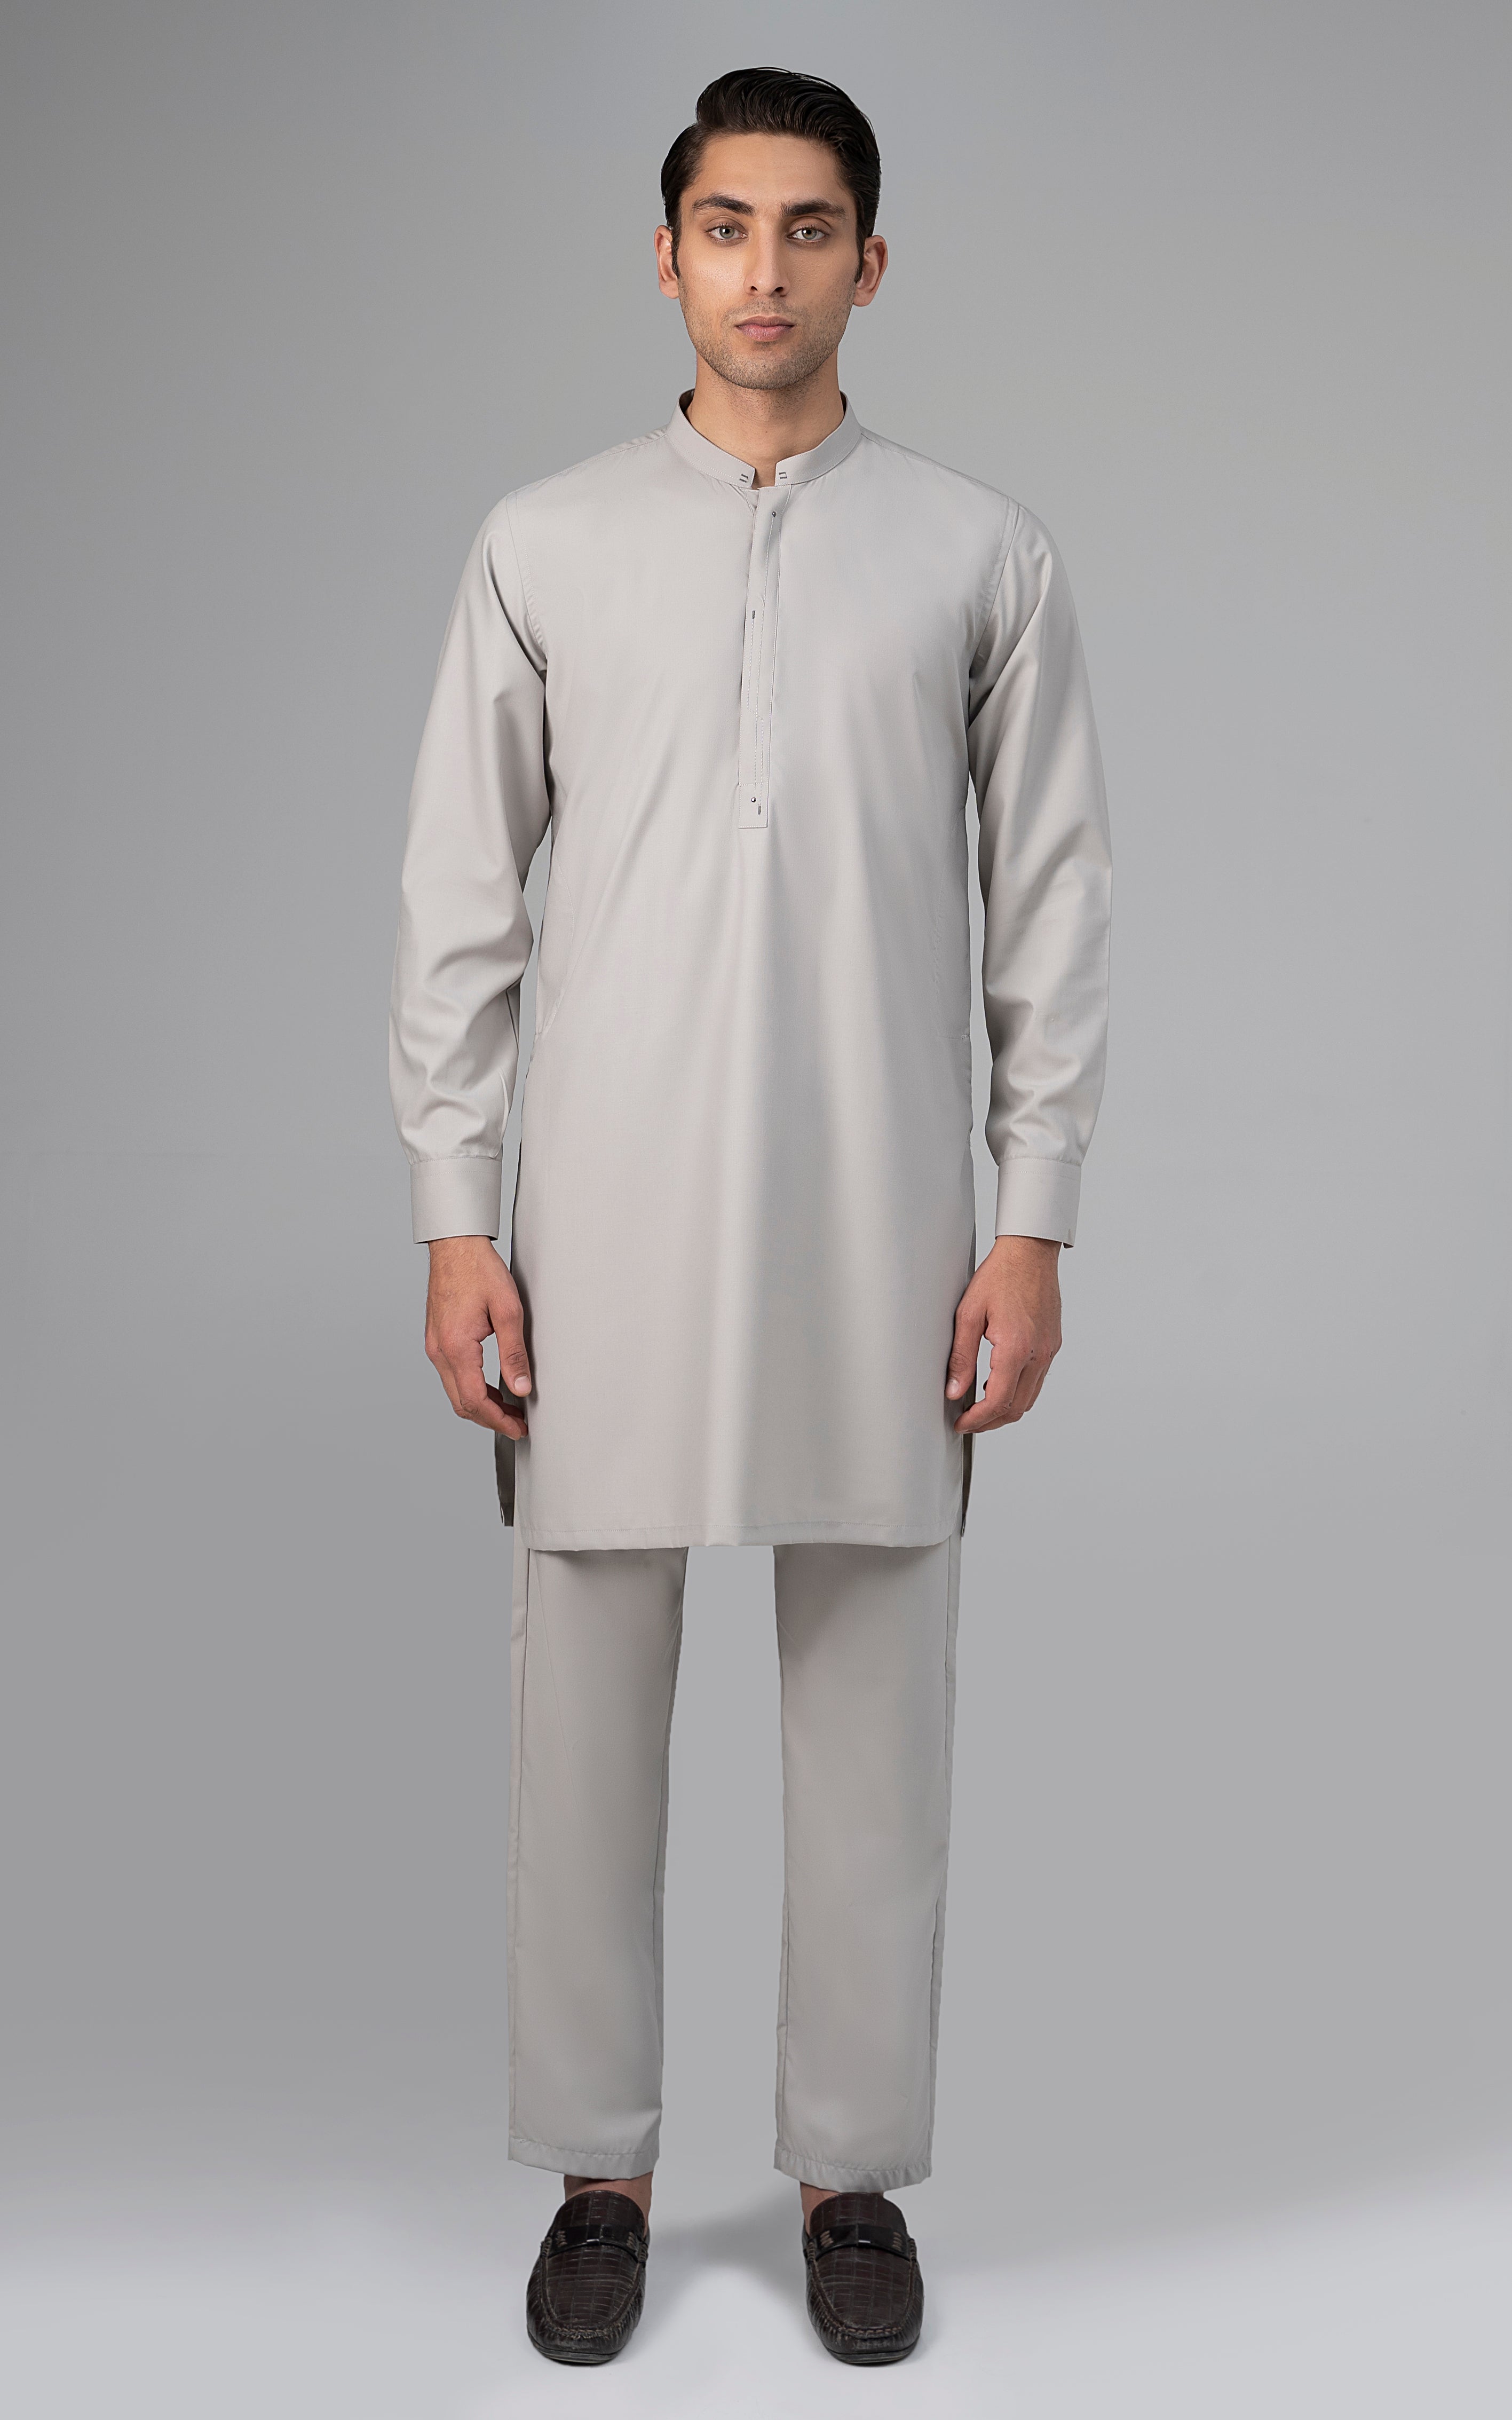 BLENDED WASH & WEAR - CLASSIC COLLECTION LIGHT GREY